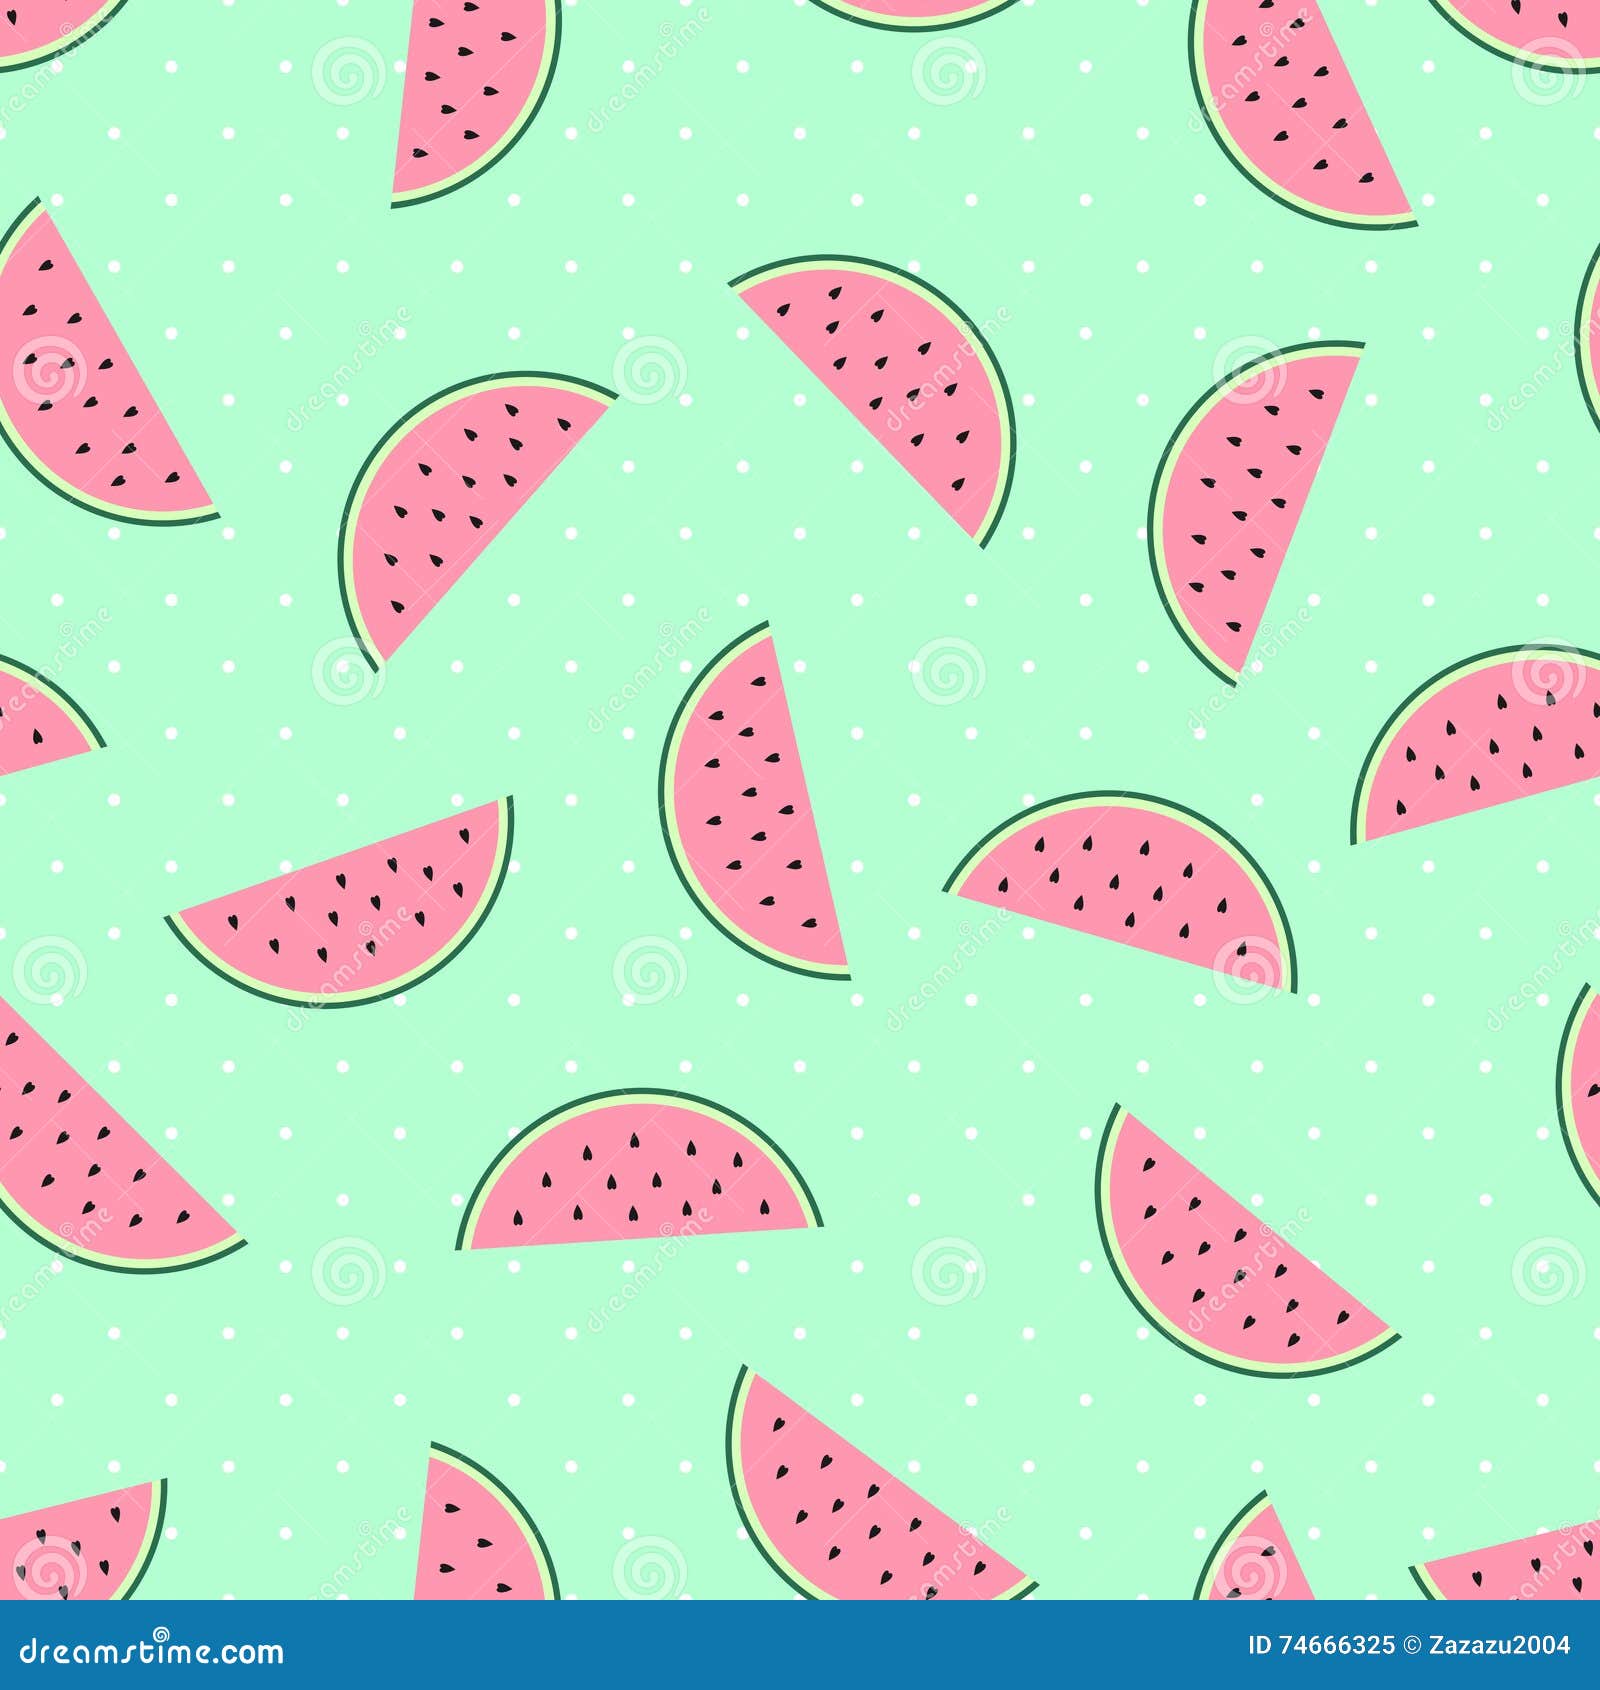 Buy Watermelon Wallpaper Online In India  Etsy India